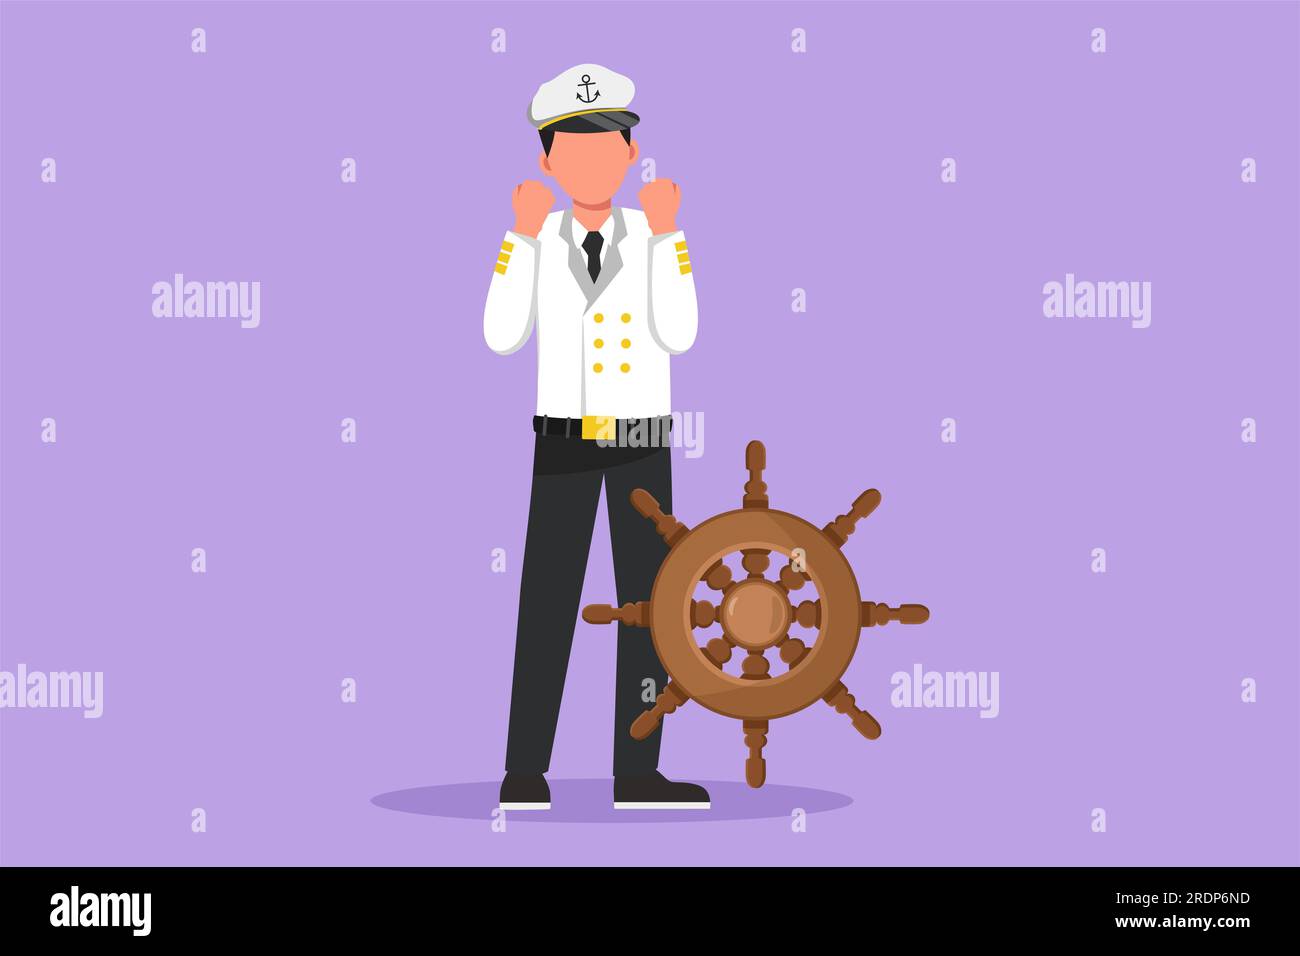 Graphic flat design drawing sailor man standing with celebrate gesture to be part of cruise ship, carrying passengers traveling across seas. Sailor on Stock Photo